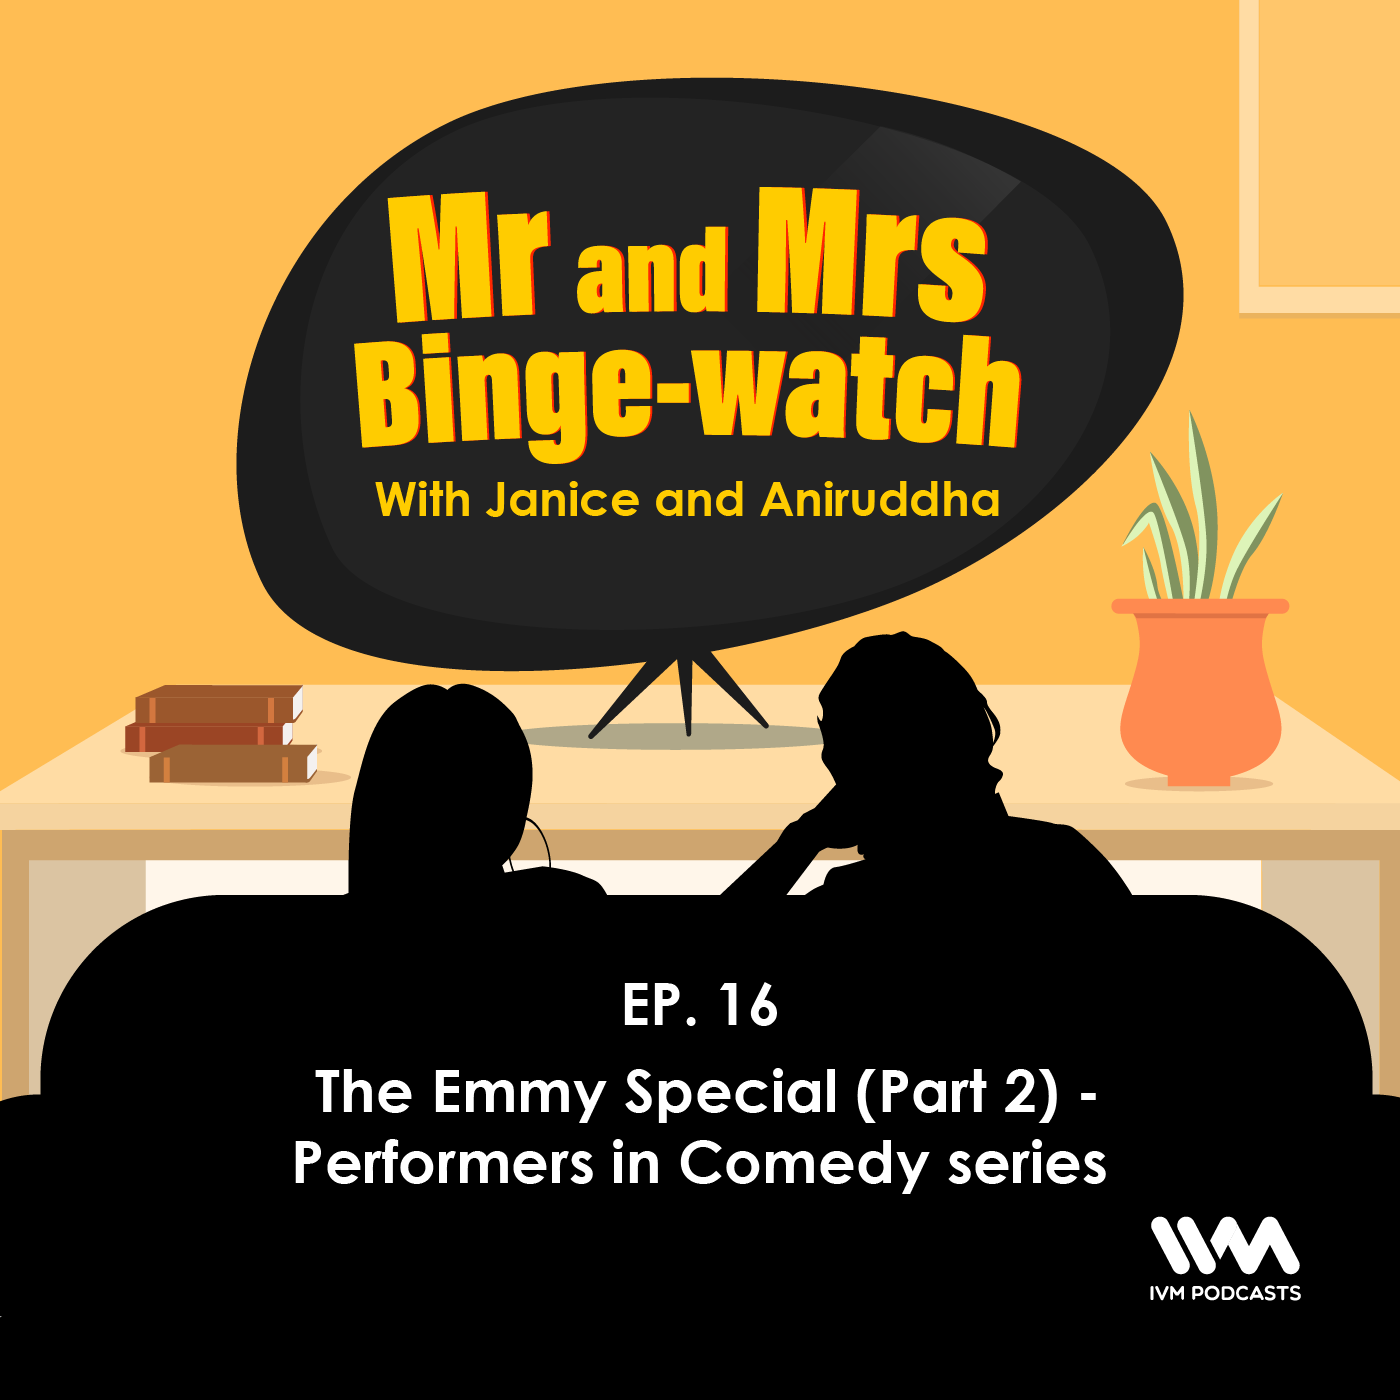 Ep. 16: The Emmy Special (Part 2) - Performers in Comedy series